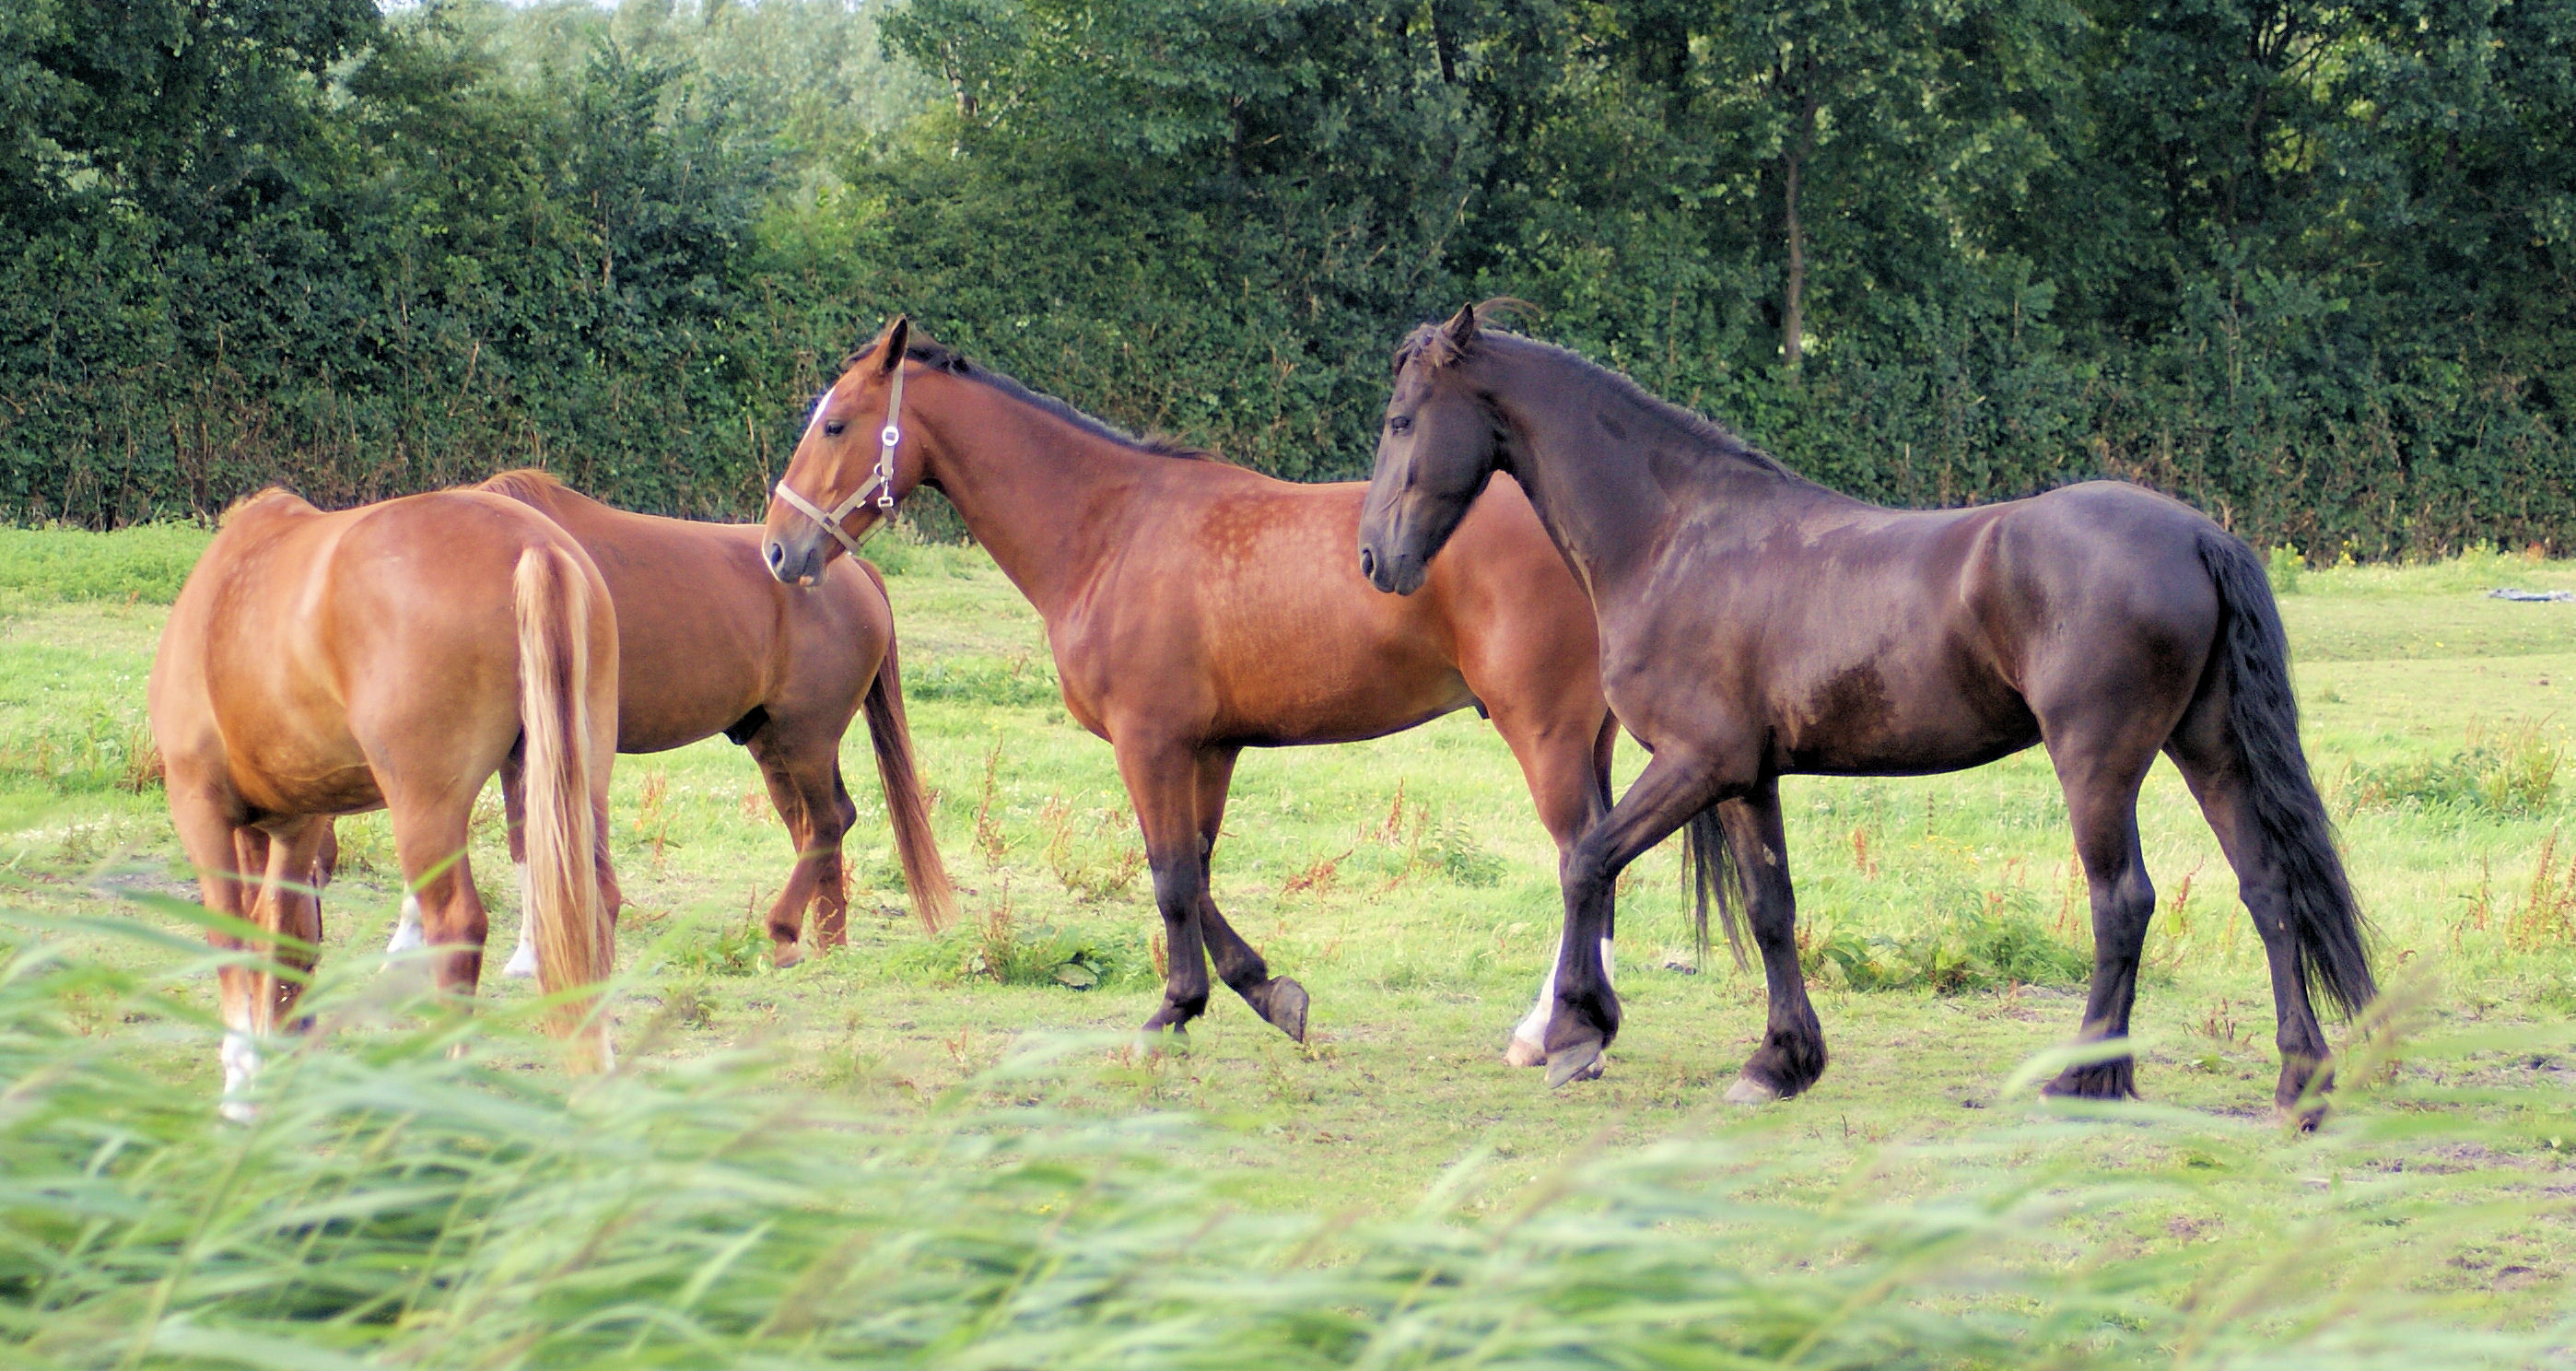 Horses in the netherlands photo